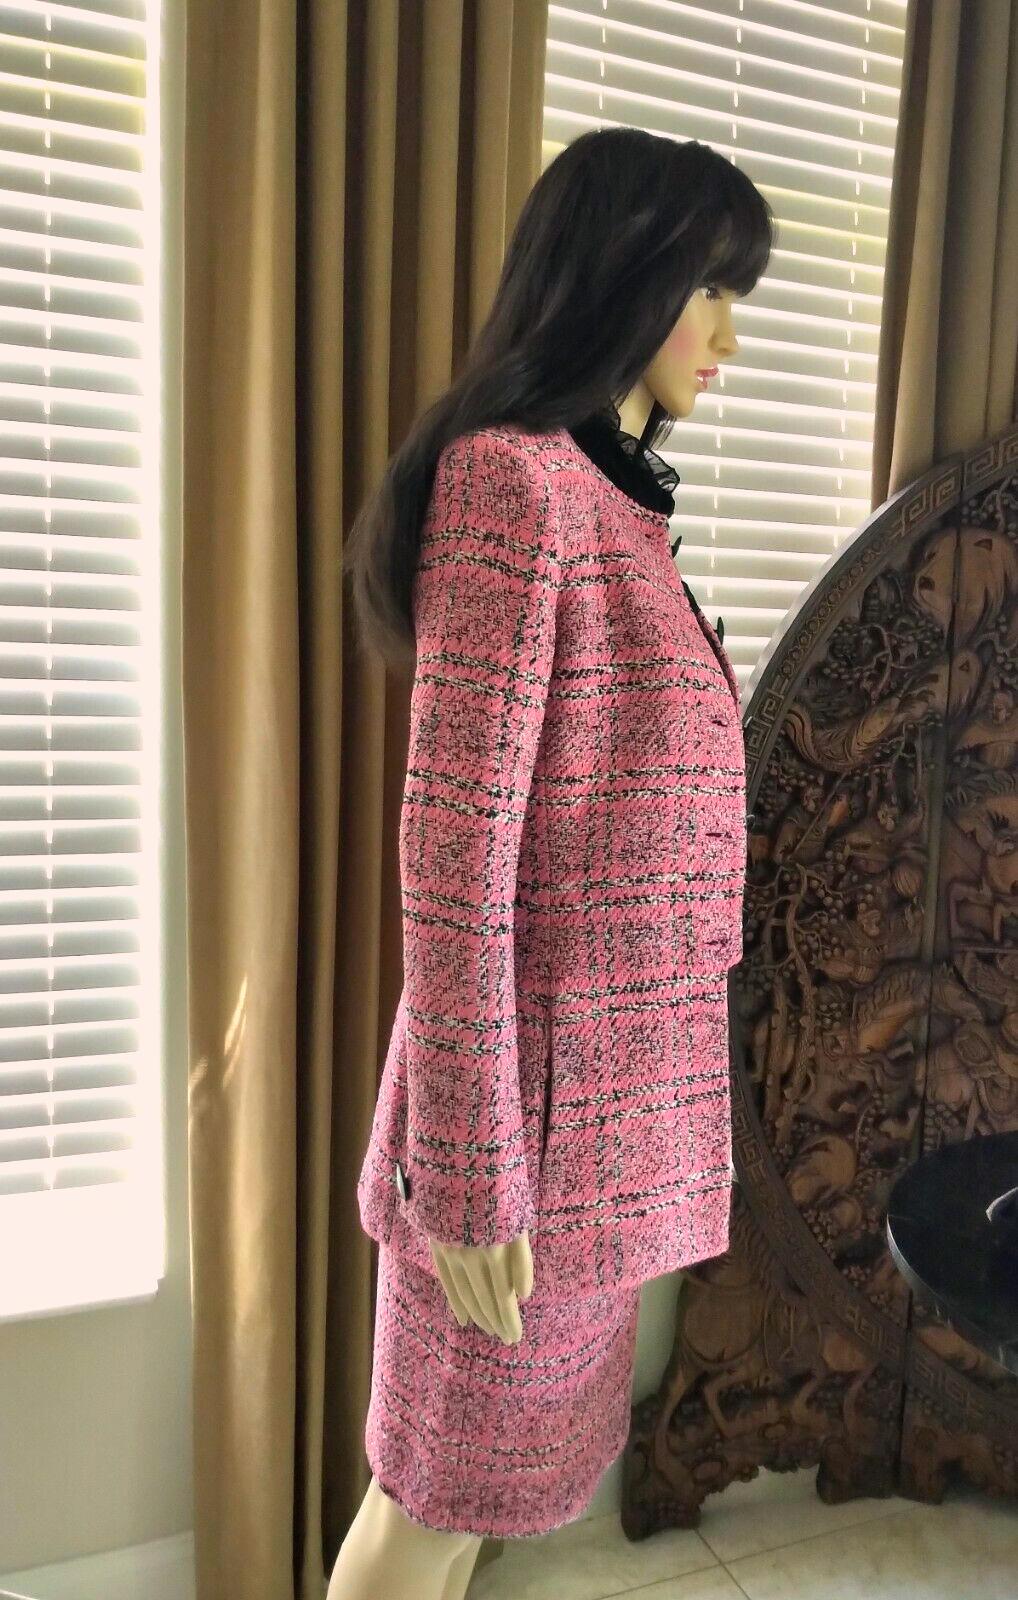 Vintage Christian Dior Pink & Black Tweed Jacket Pencil Skirt Suit FR 36/ US 4  In Excellent Condition For Sale In Ormond Beach, FL